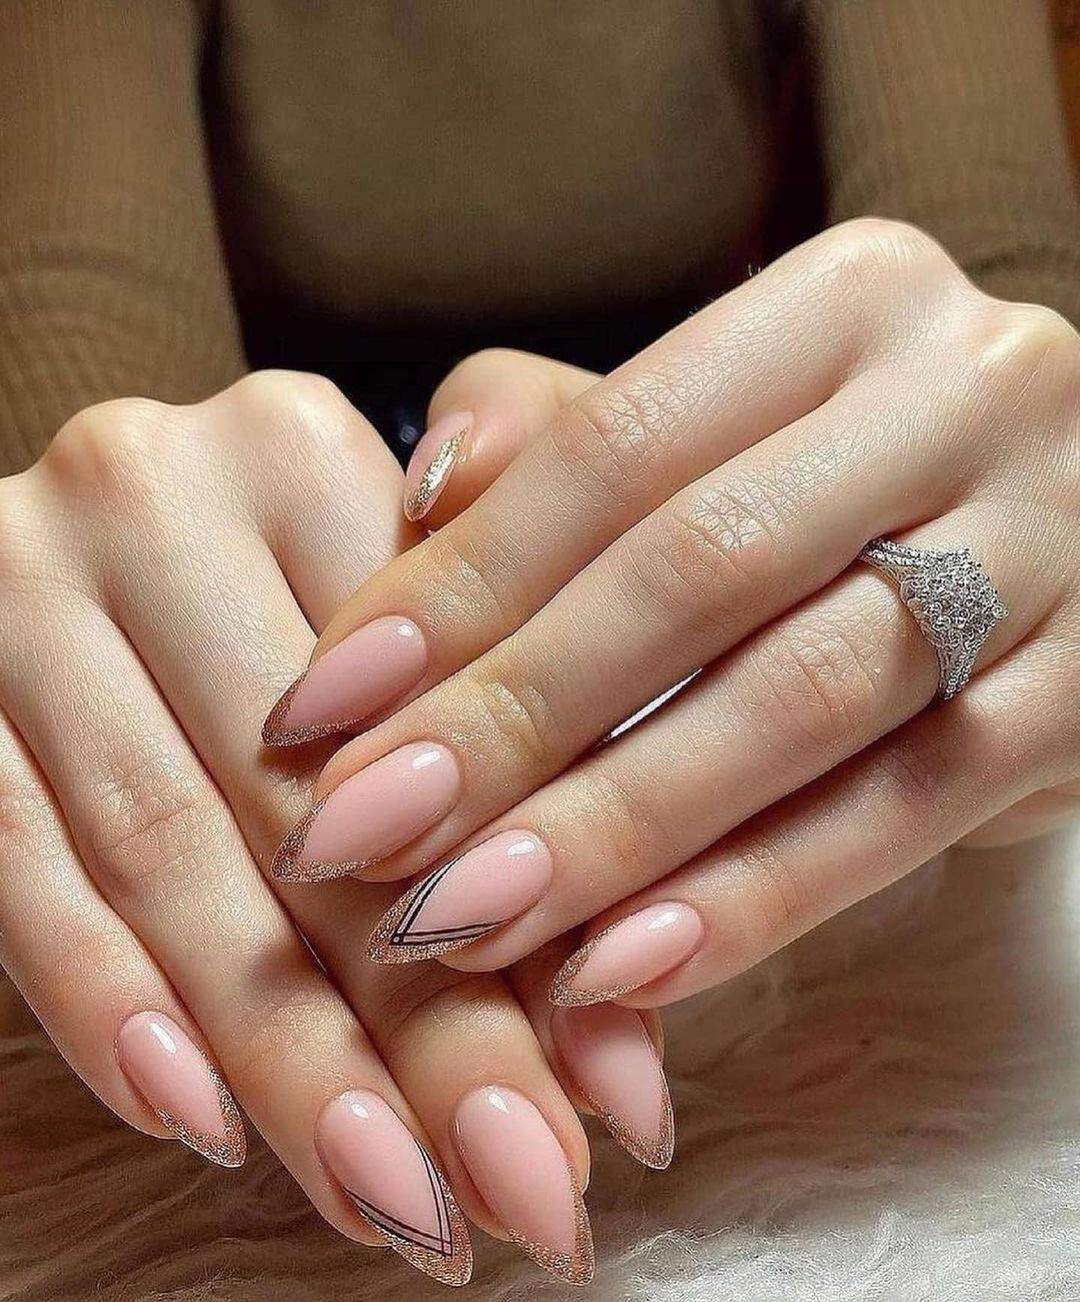 30+ Best Summer 2021 Nail Trends And Manicure Ideas images 14